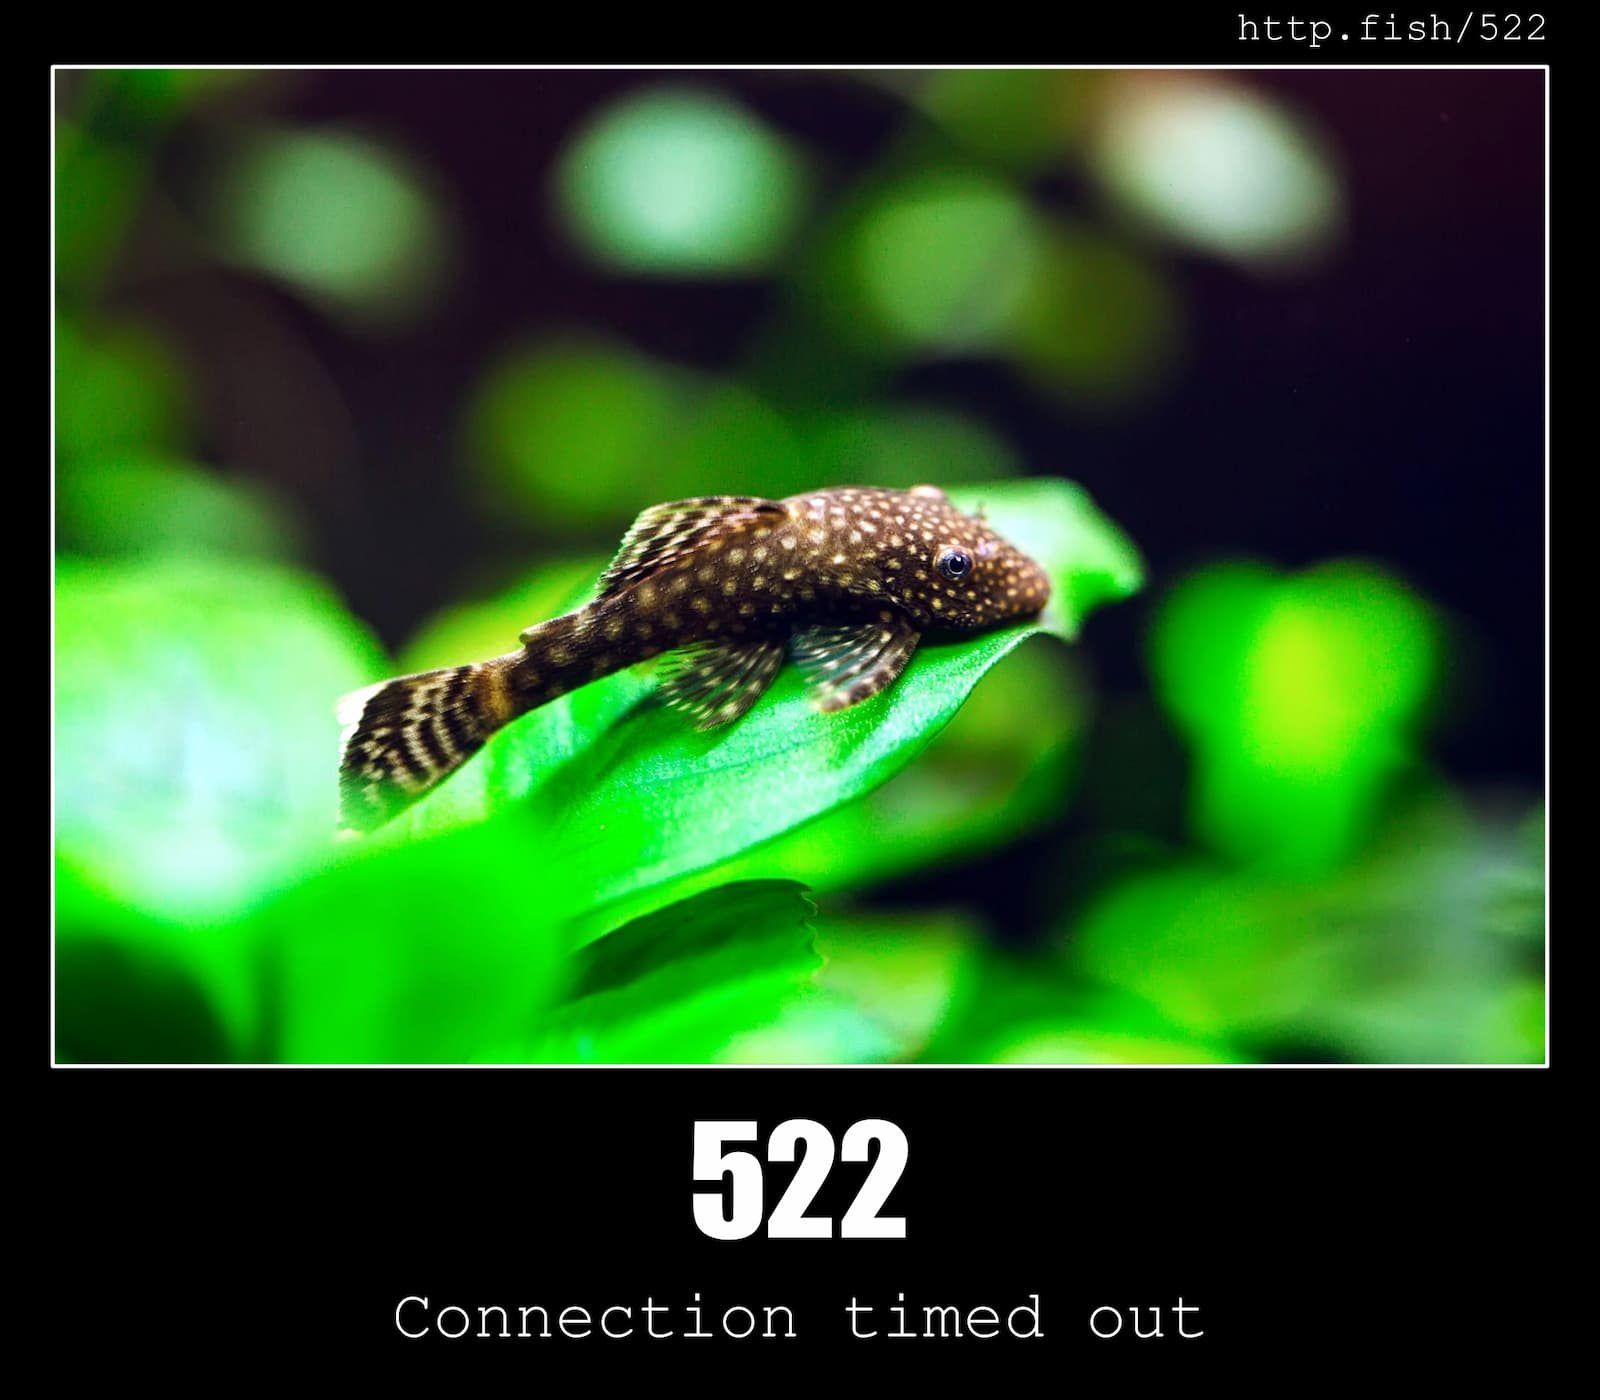 HTTP Status Code 522 Connection timed out & Fish